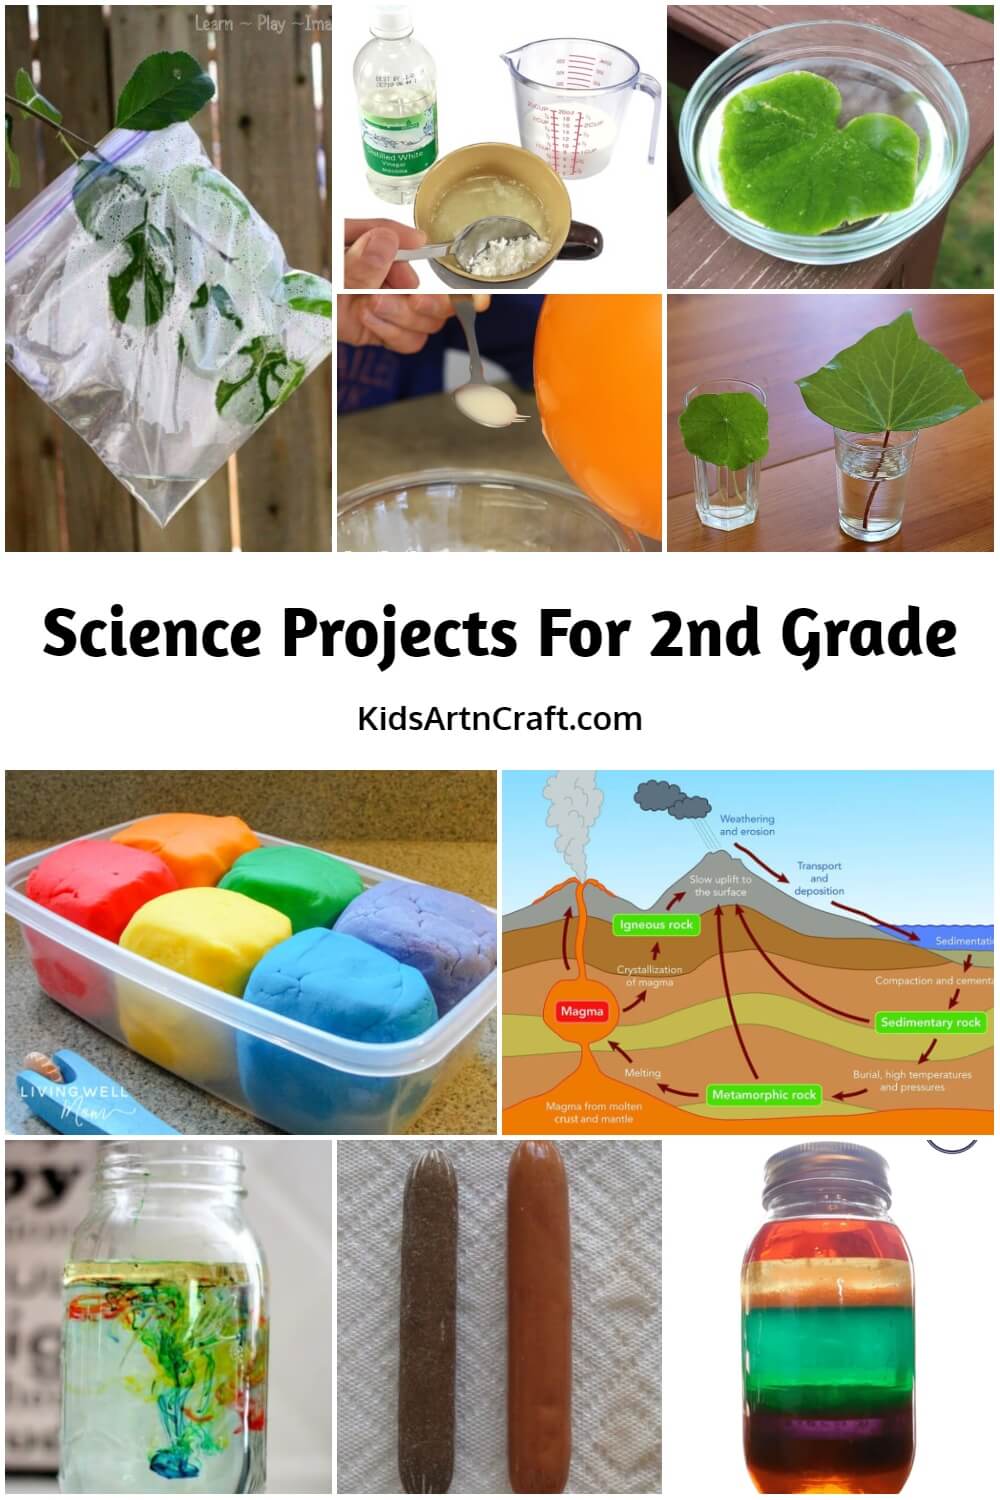 Science Projects for 2nd Grade